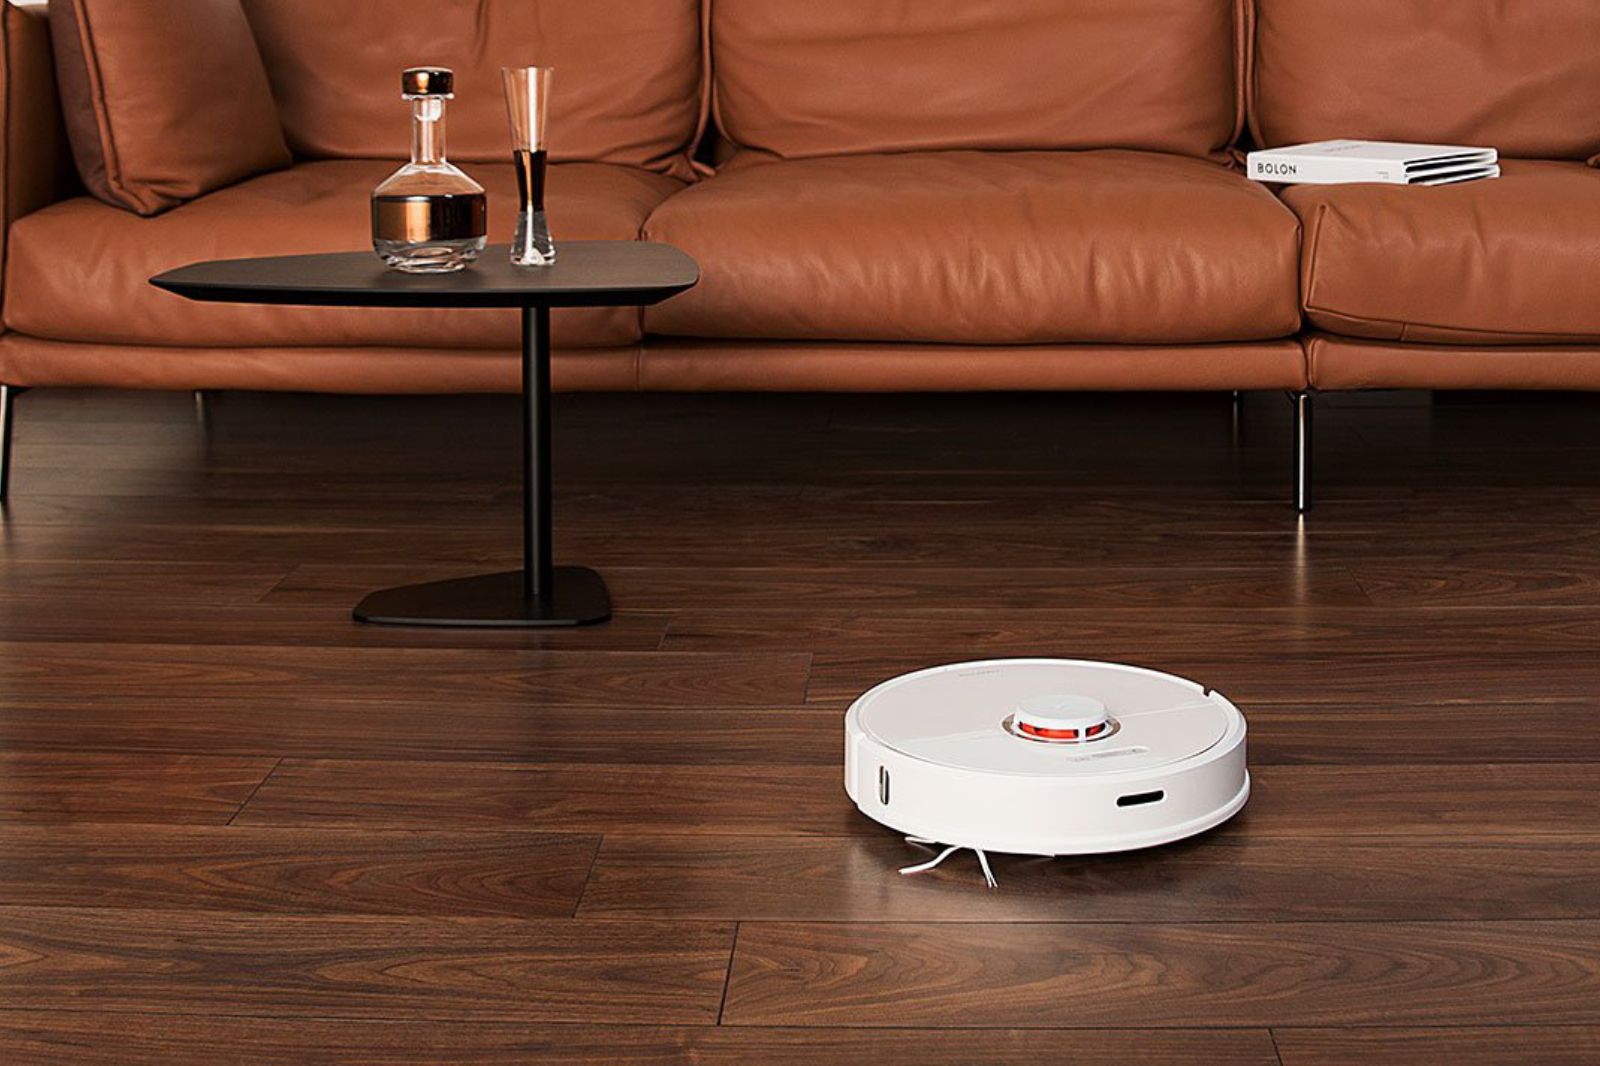 Roborock S6 has all the power and intelligence of a 900 vacuum but for a lot less image 1